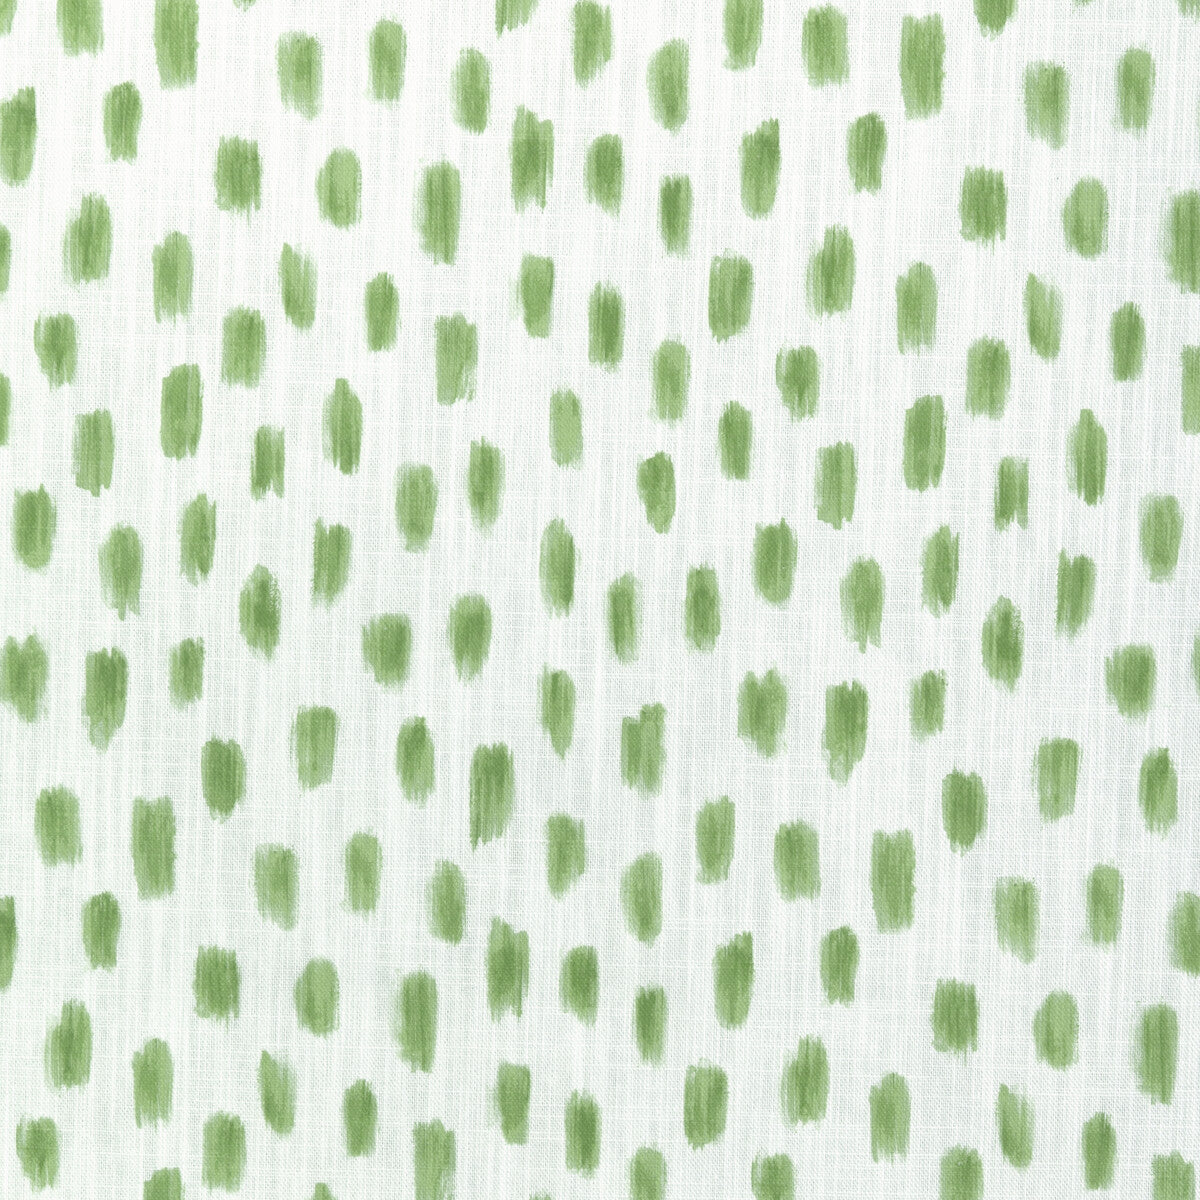 Brush Off fabric in lime color - pattern BRUSH OFF.31.0 - by Kravet Basics in the Small Scale Prints collection